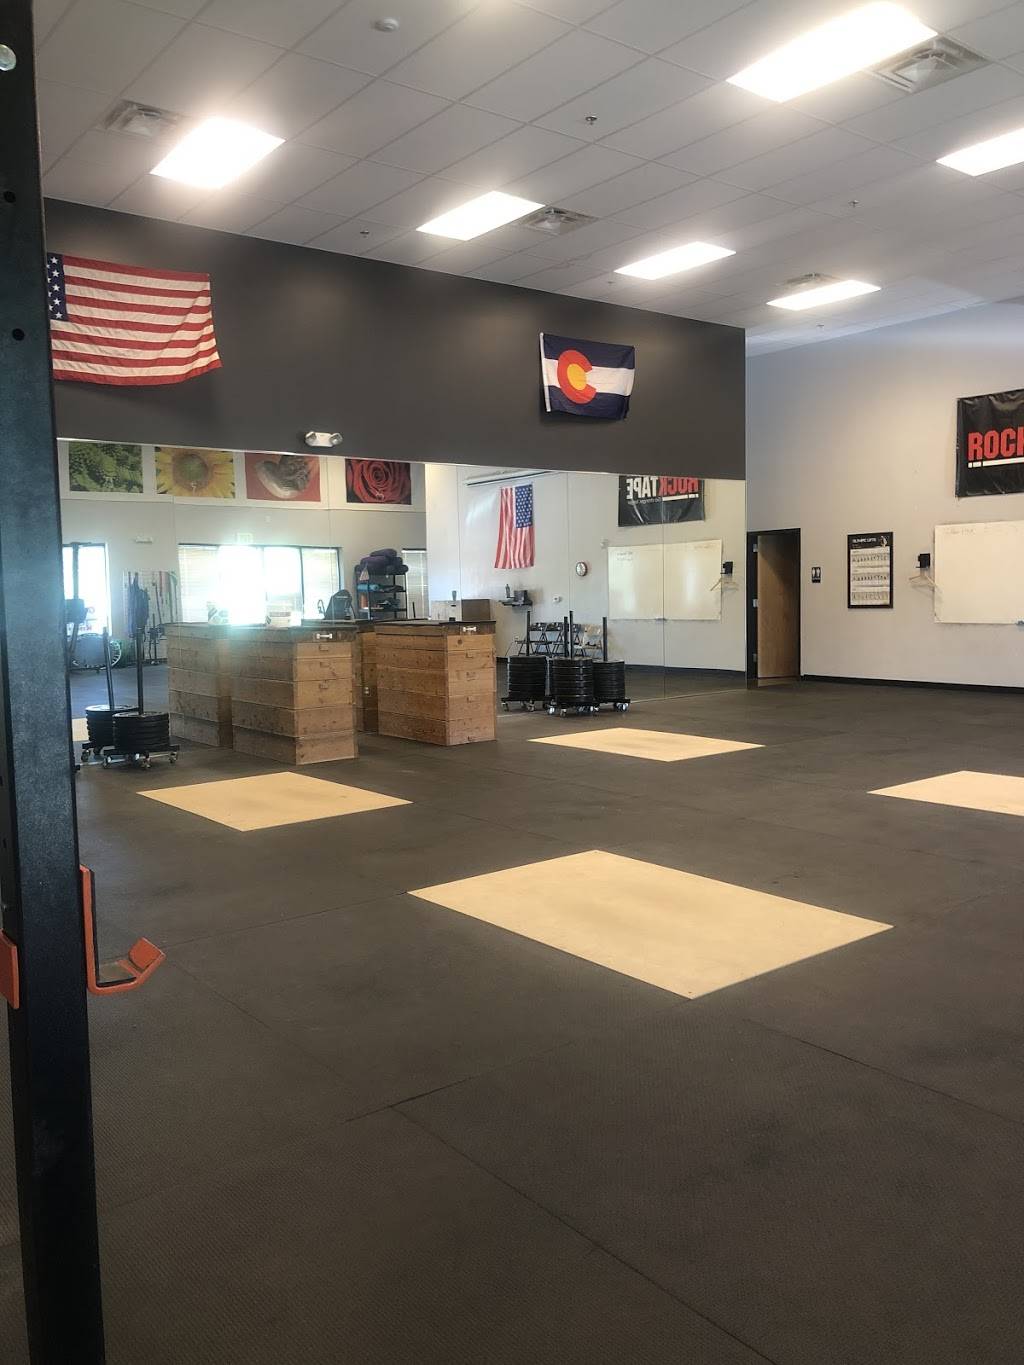 Mile High Barbell: Weightlifting | Powerlifting | Personal Train - gym  | Photo 1 of 1 | Address: 4925 S Santa Fe Dr Ste 100, Littleton, CO 80120, USA | Phone: (512) 516-4798